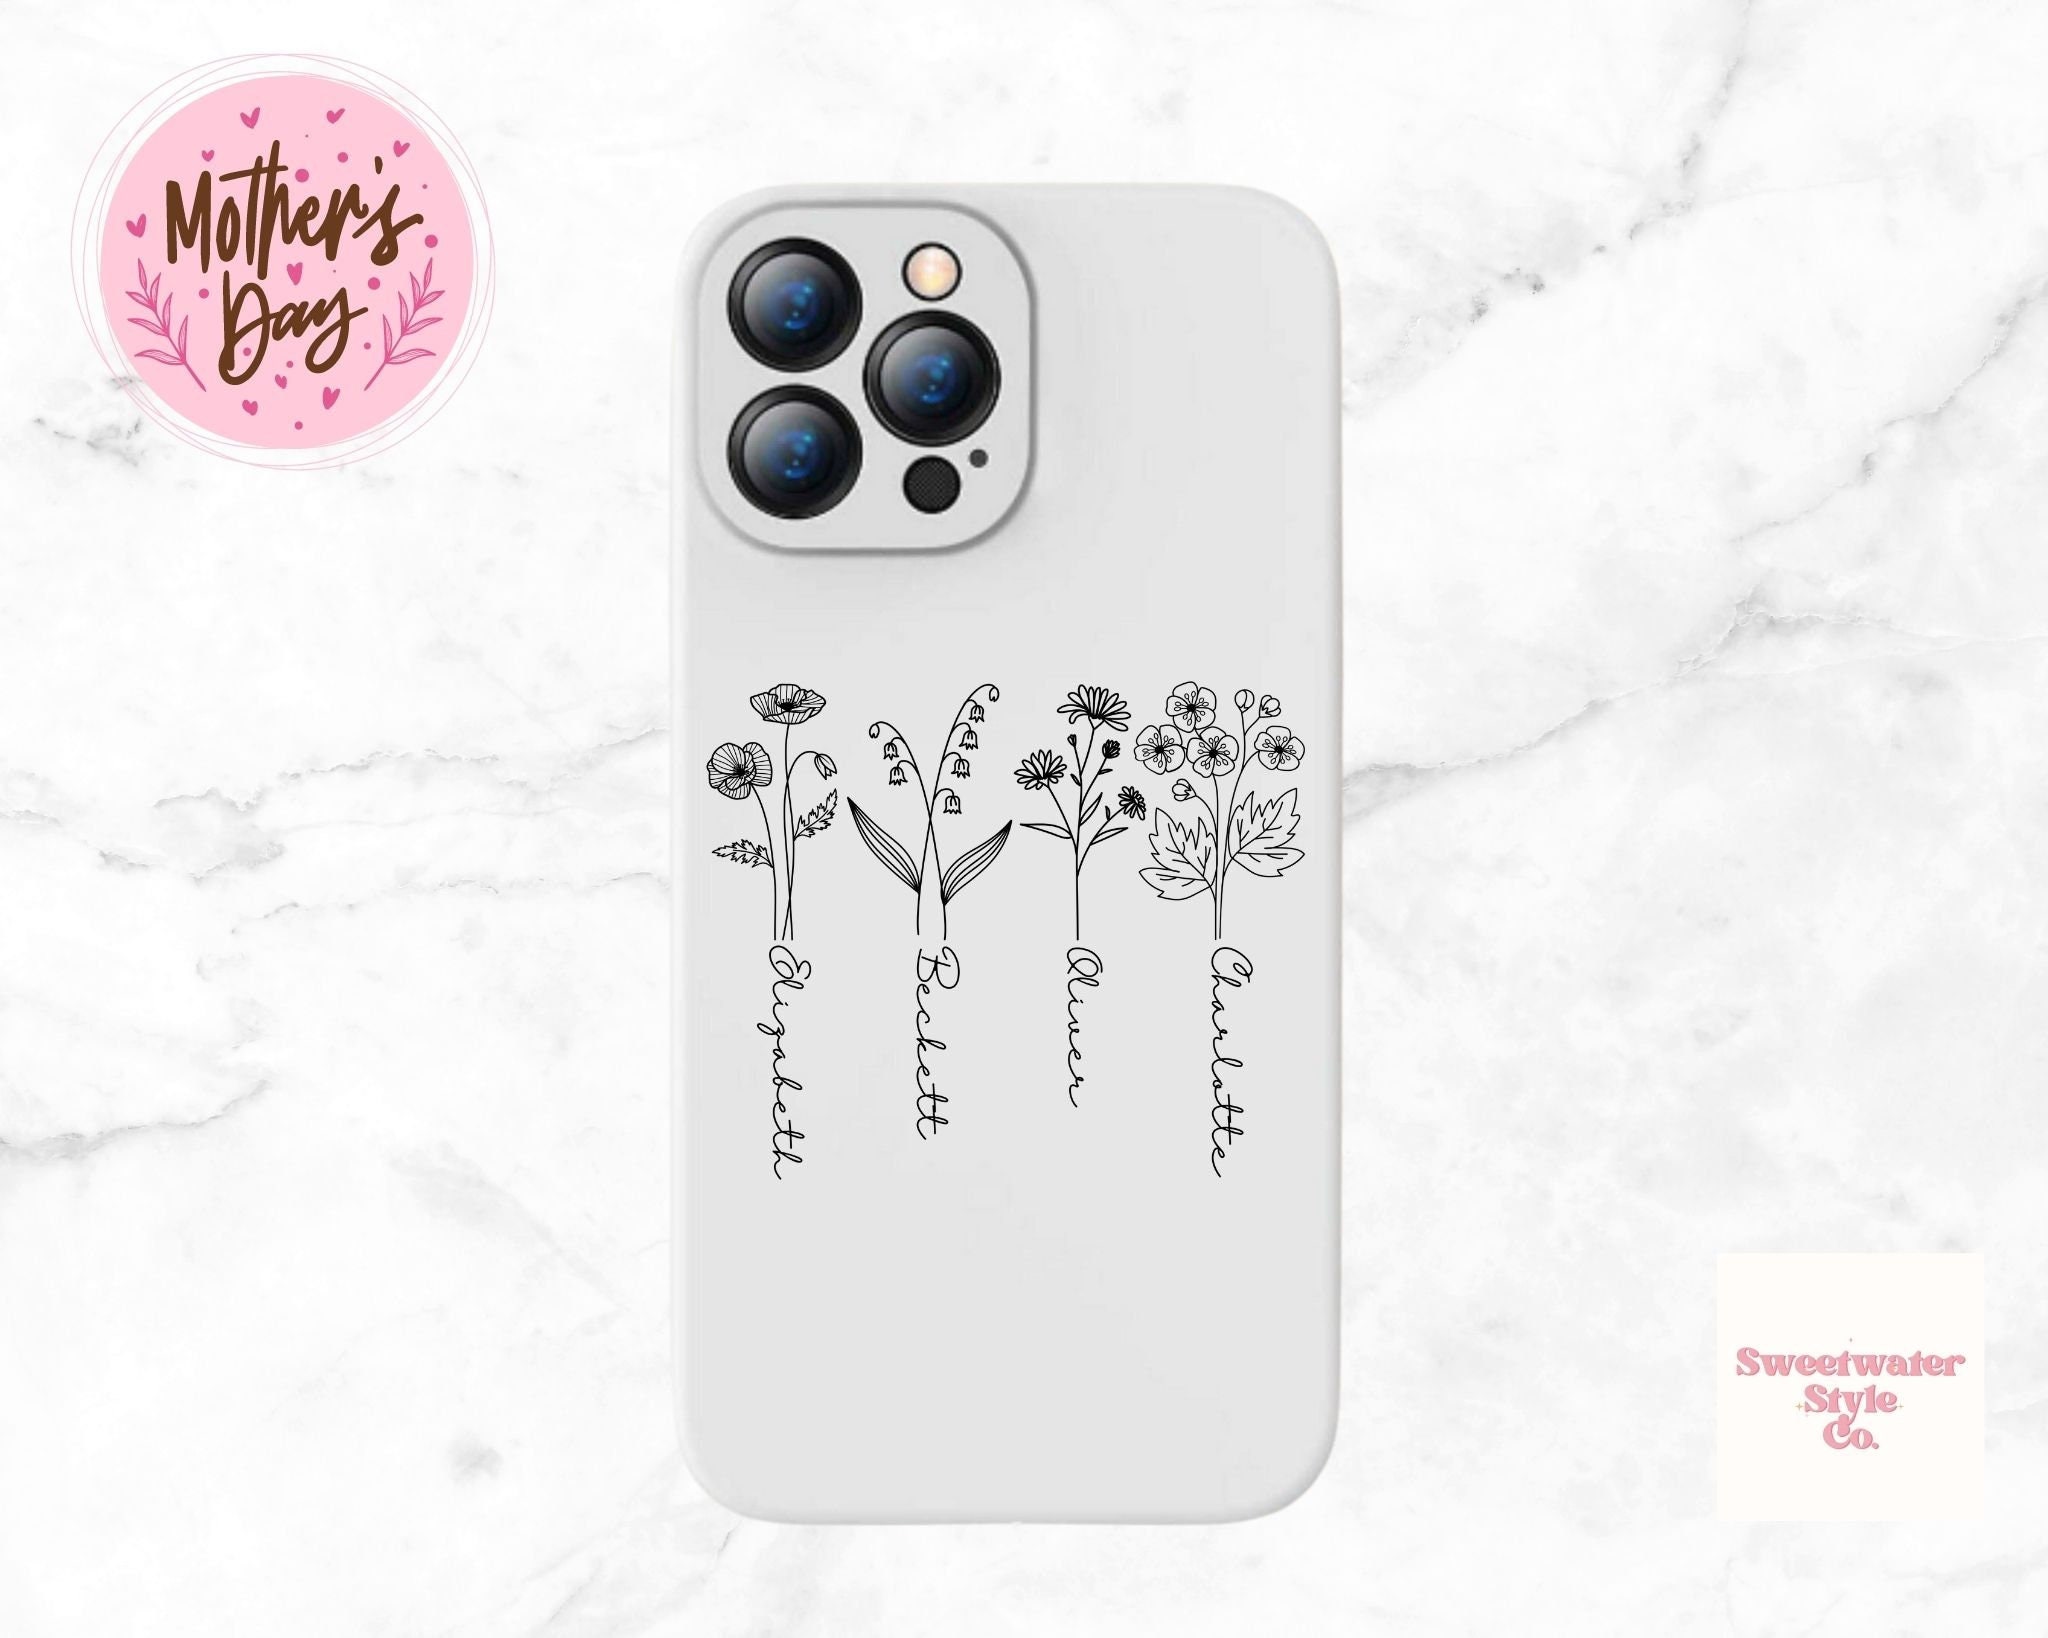 Cute HEART LOVE YOU MOM Mother's Day Photo Case-Mate iPhone Case